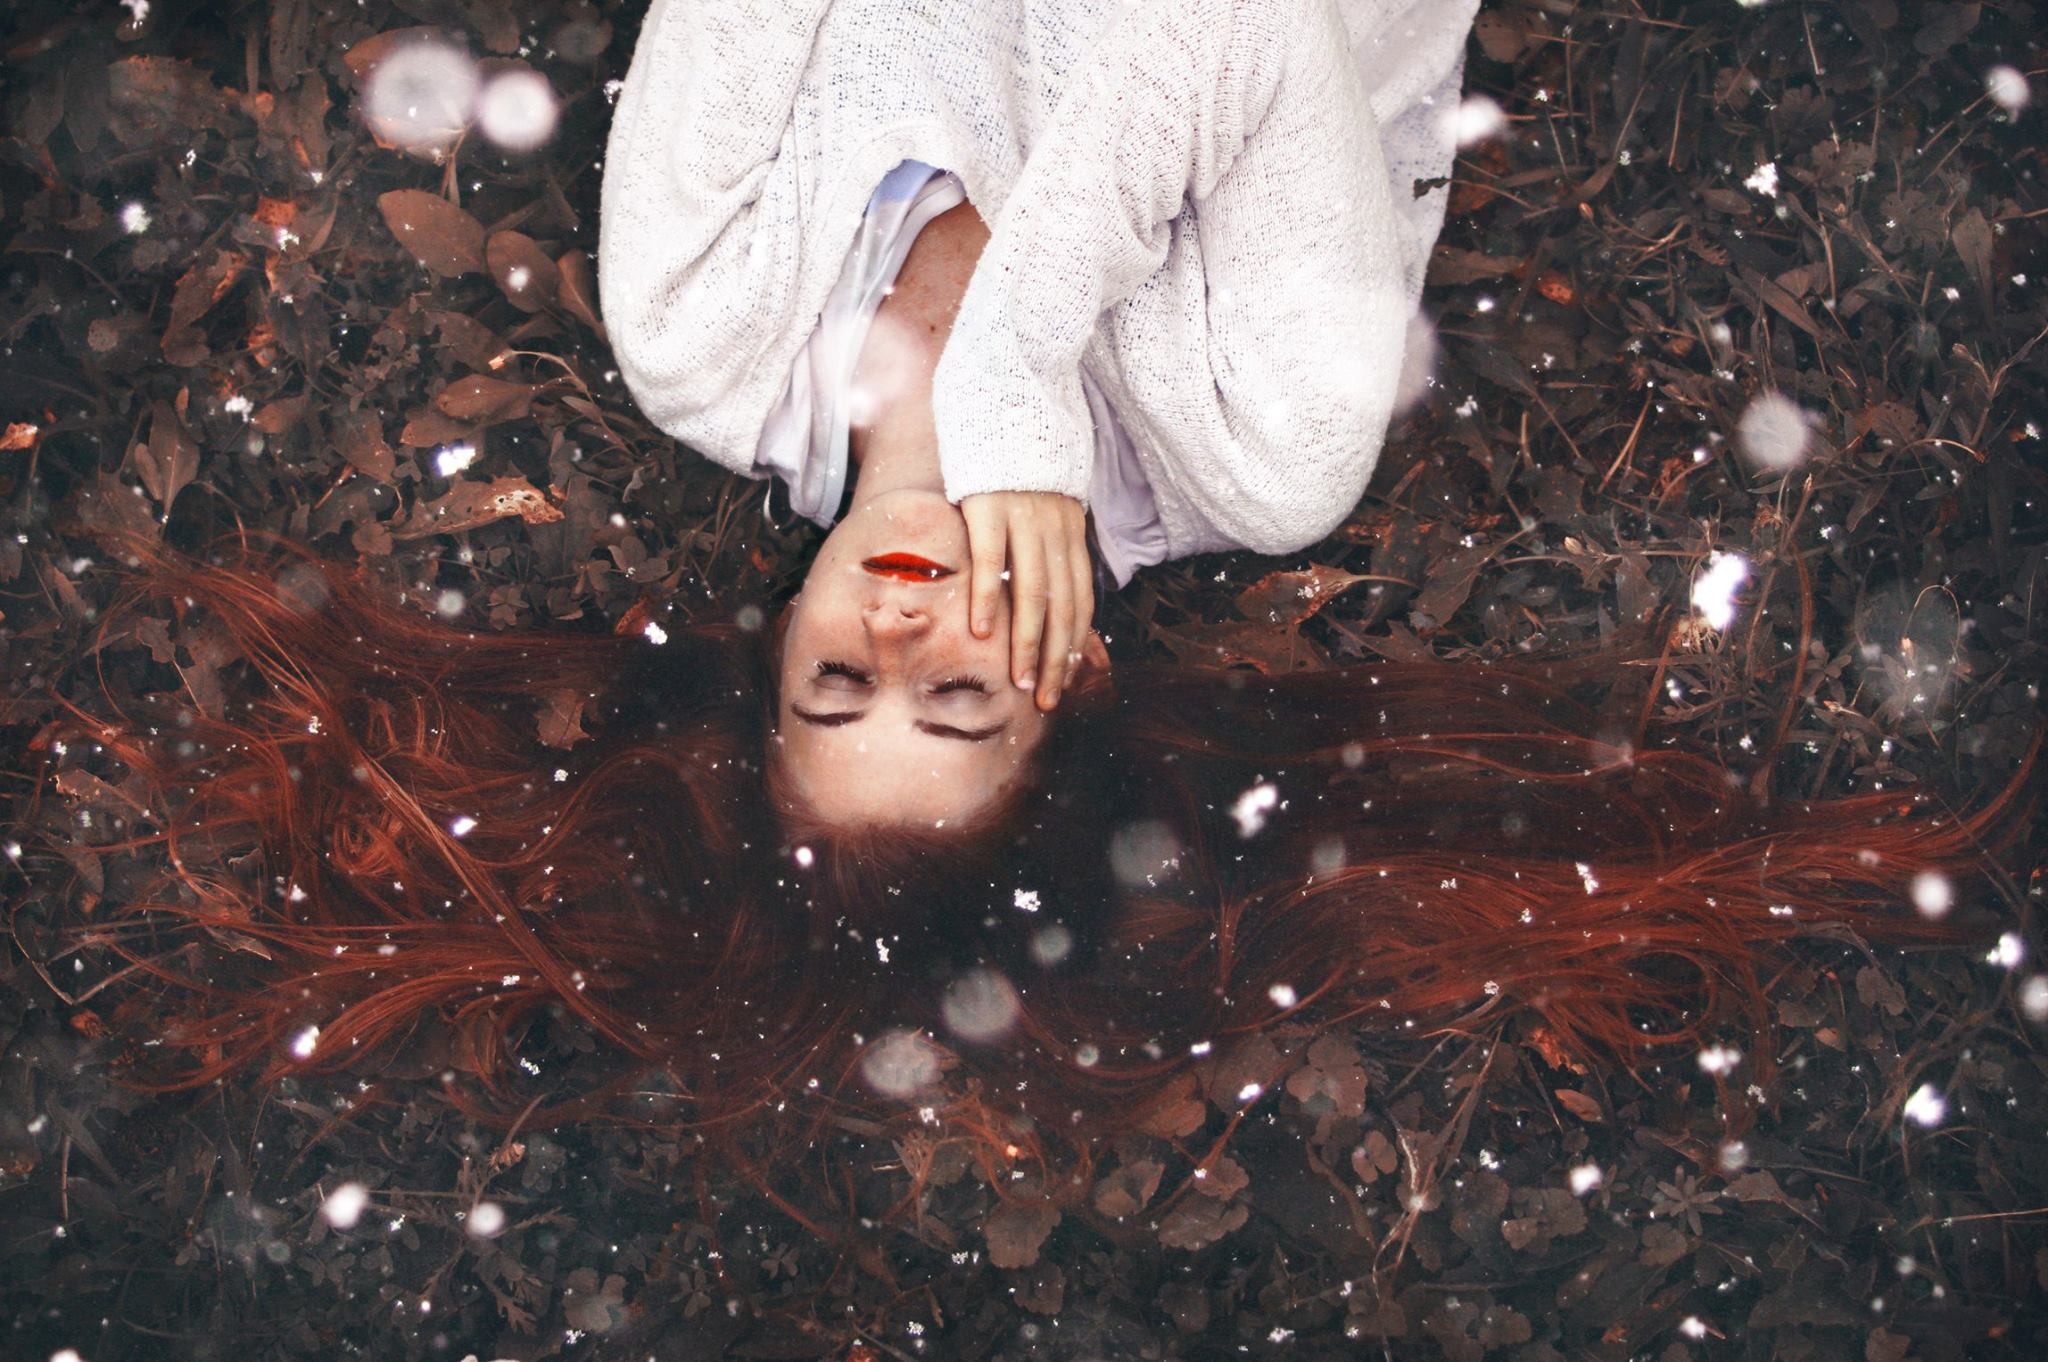 People 2048x1362 women lying on back redhead red lipstick hand on face closed eyes snowflakes women outdoors outdoors dyed hair lipstick sweater leaves fallen leaves long hair